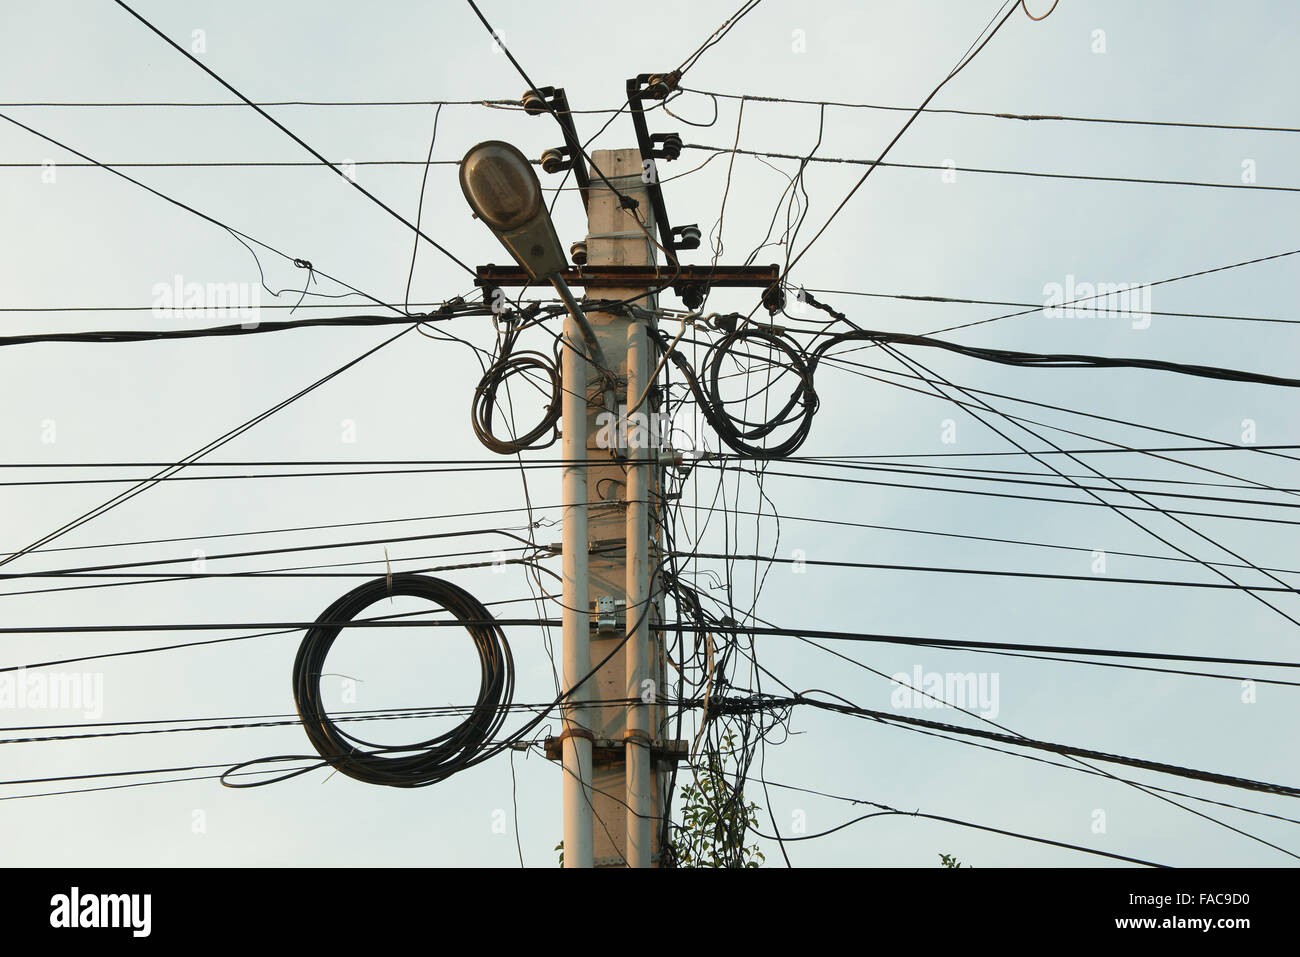 tangle of electrical wires on a pole Stock Photo